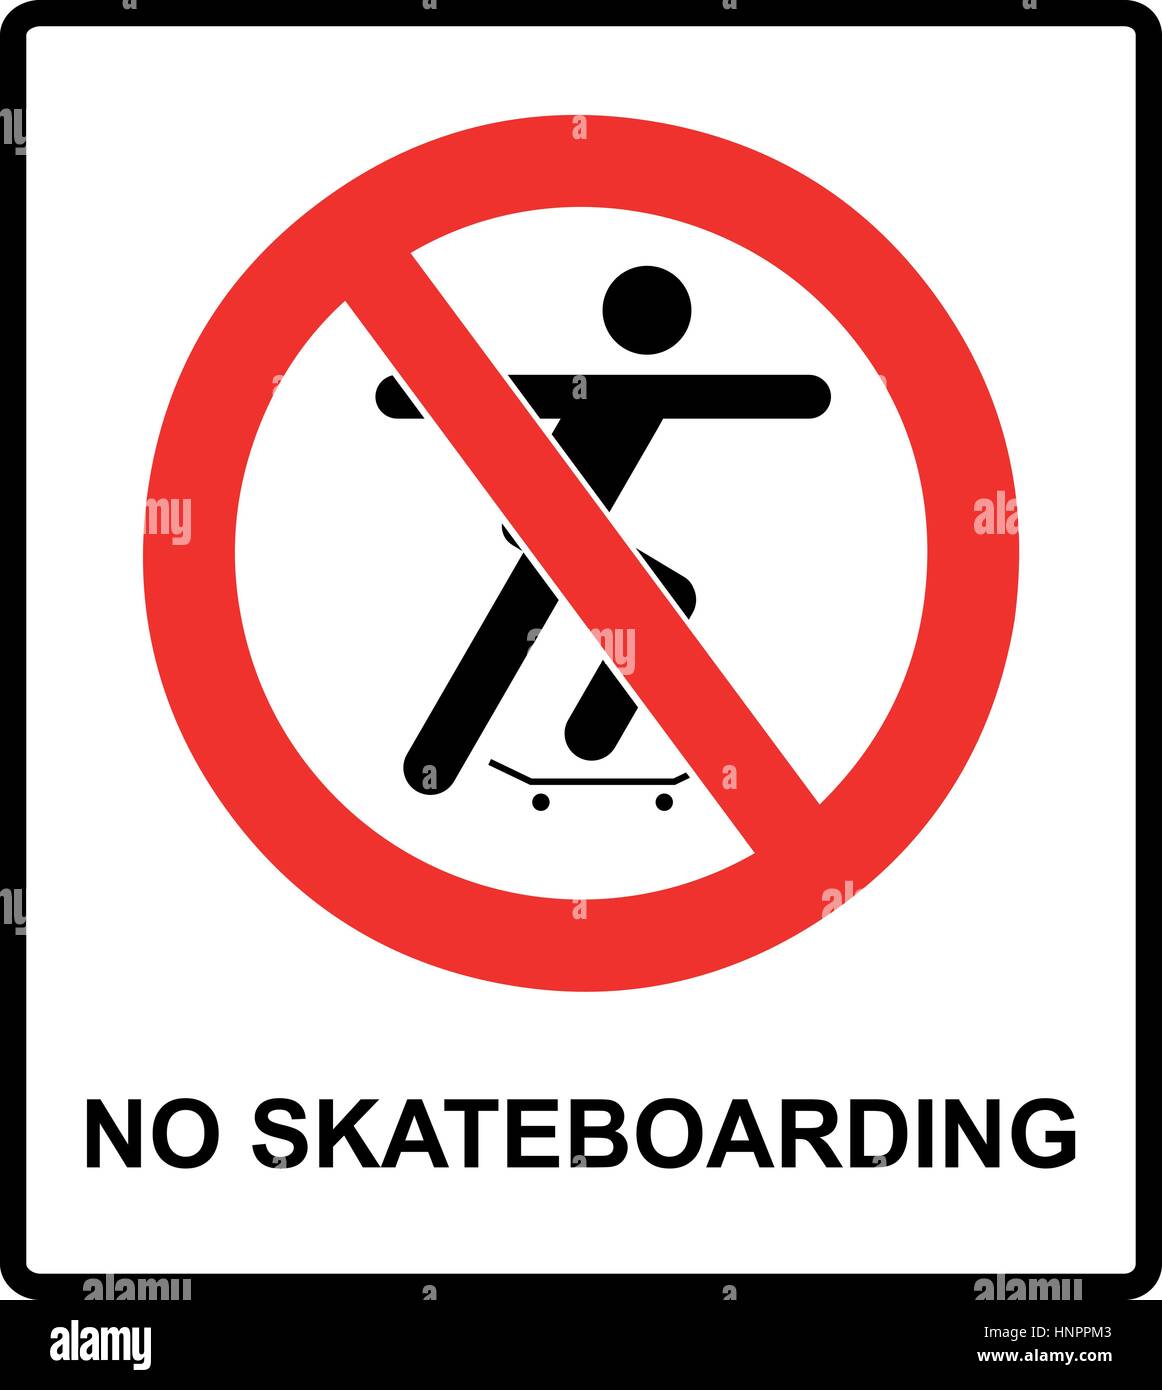 vector illustration of a no skateboarding allowed sign with man silhouette.  warning banner for street, outdoors and parks with symbol in red prohibiti  Stock Vector Image & Art - Alamy